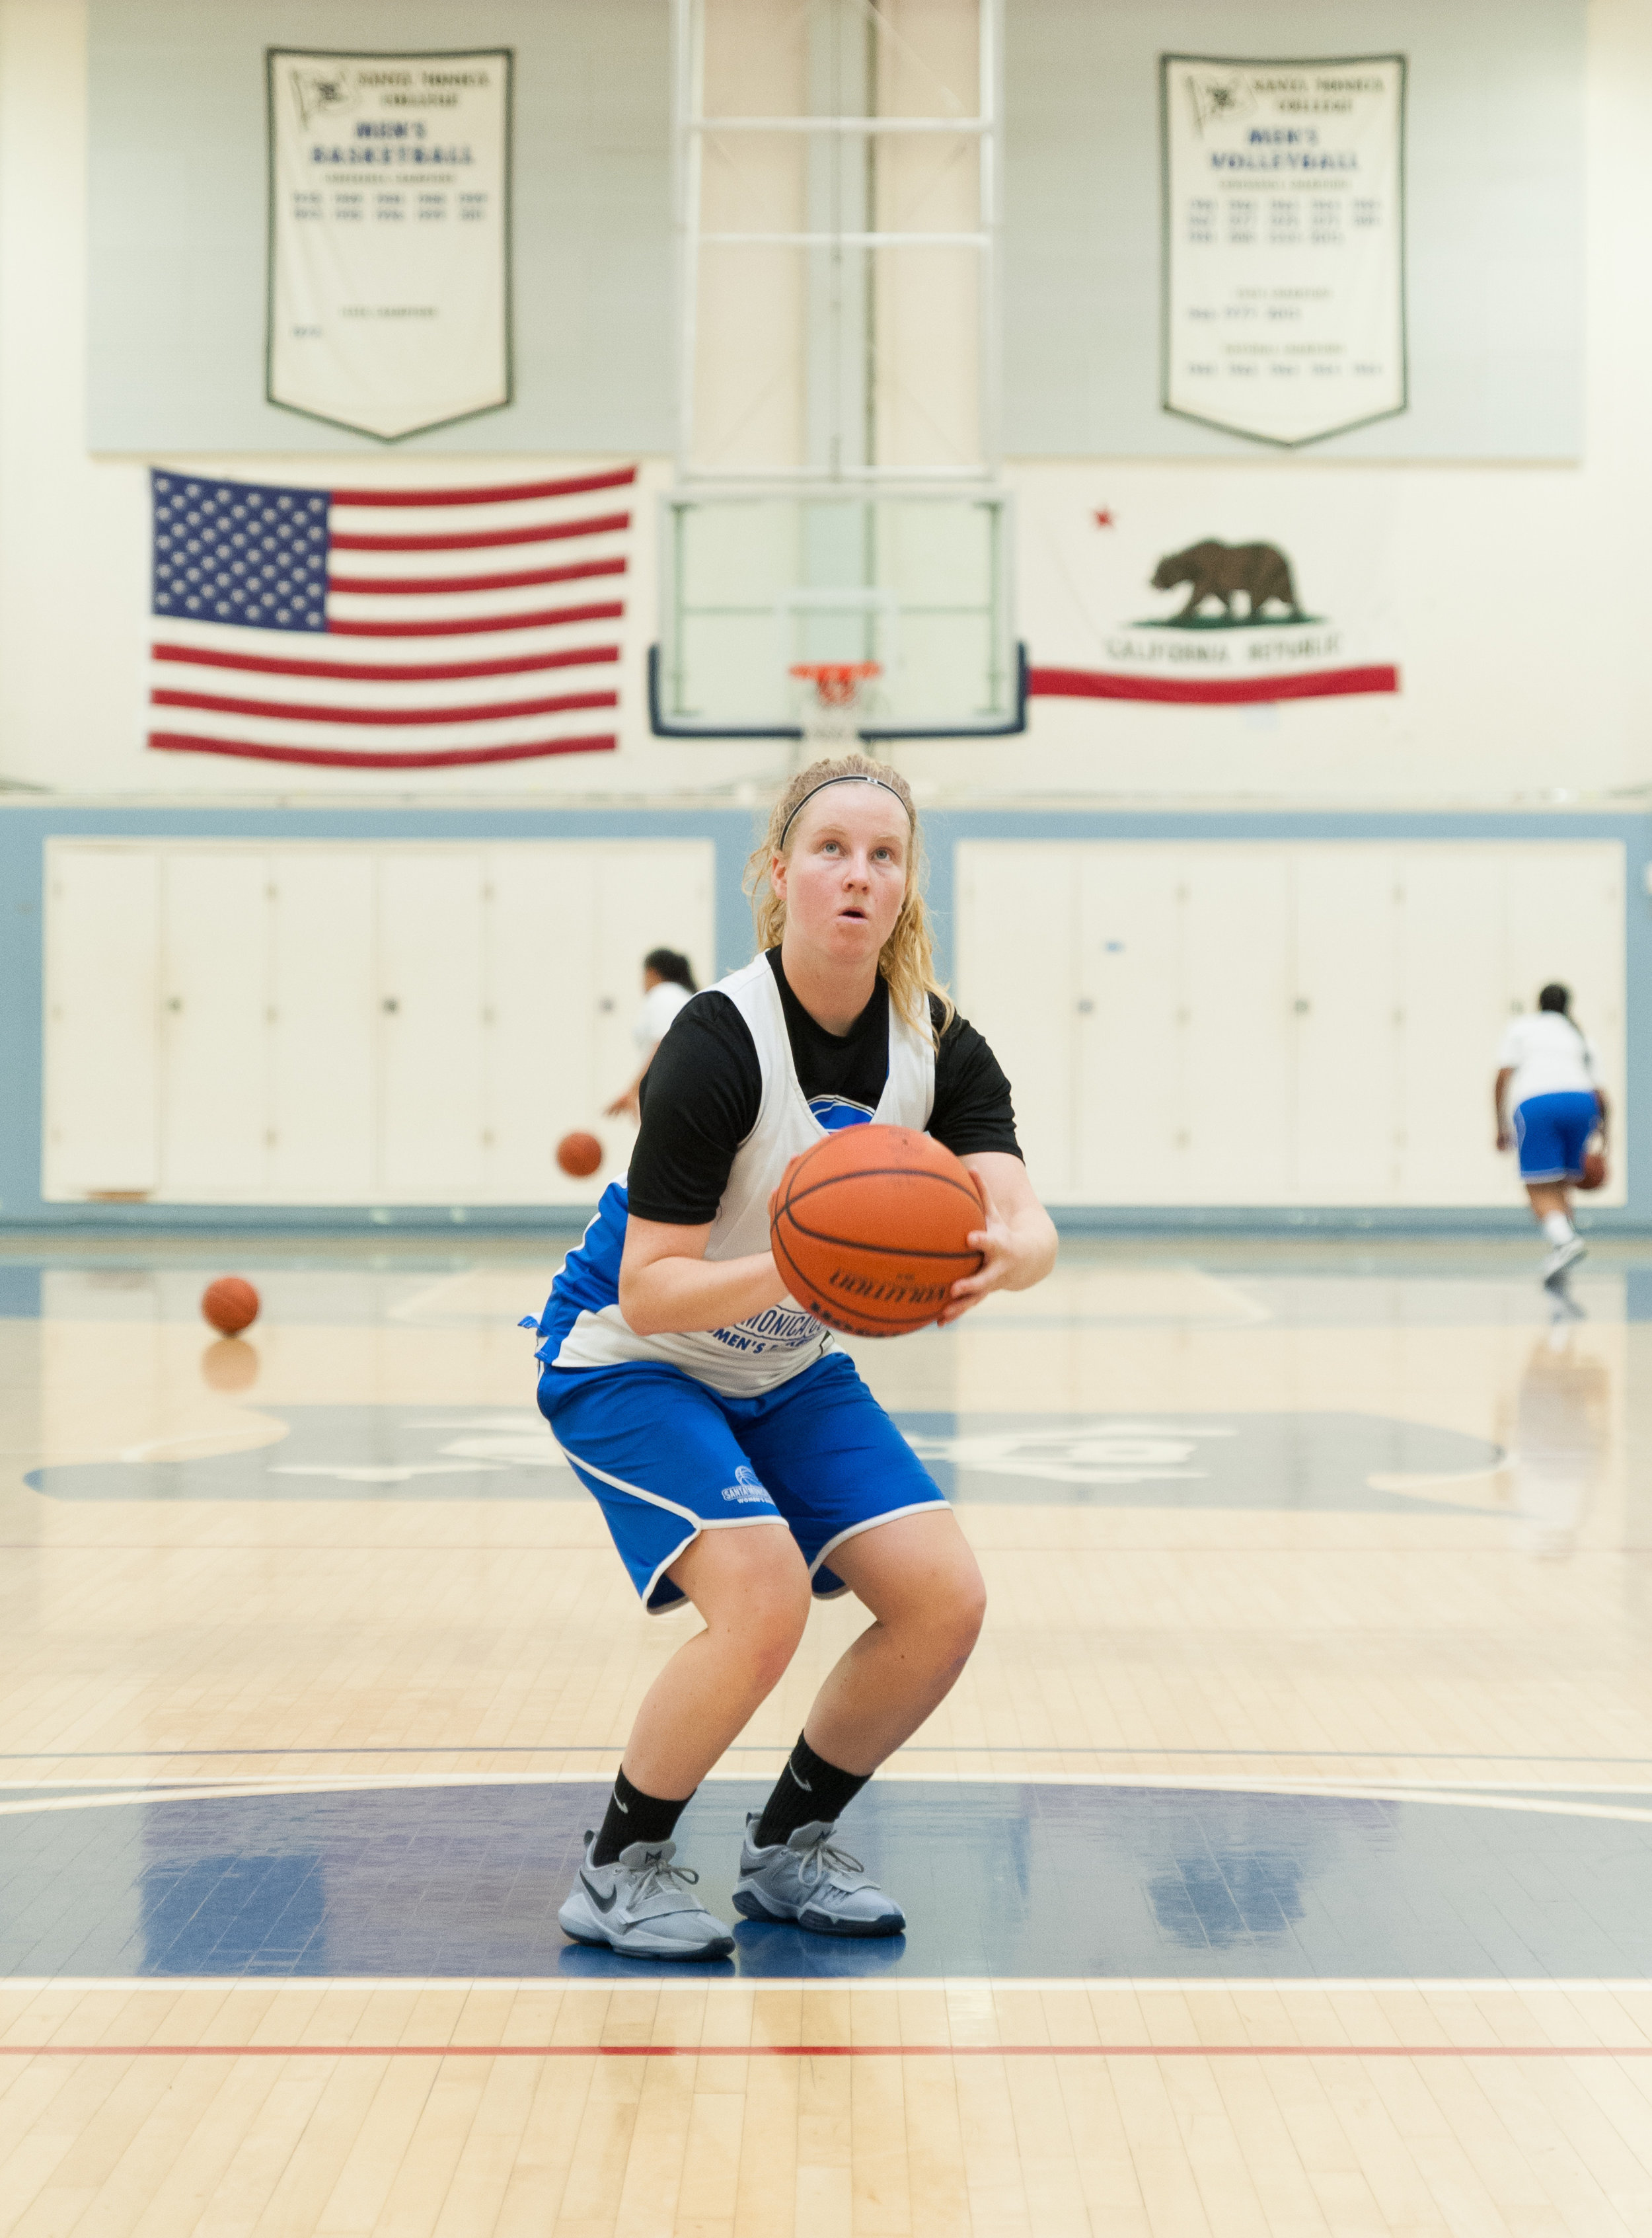  Freshman guard Pleun Geurts (24) of the Santa Monica College Women's Basketball Team shoots free throws during Monday's afternoon practice. SMC Pavilion, Santa Monica College Main Campus, Santa Monica, Calif.. November 13, 2017.(Photo by: Justin Han